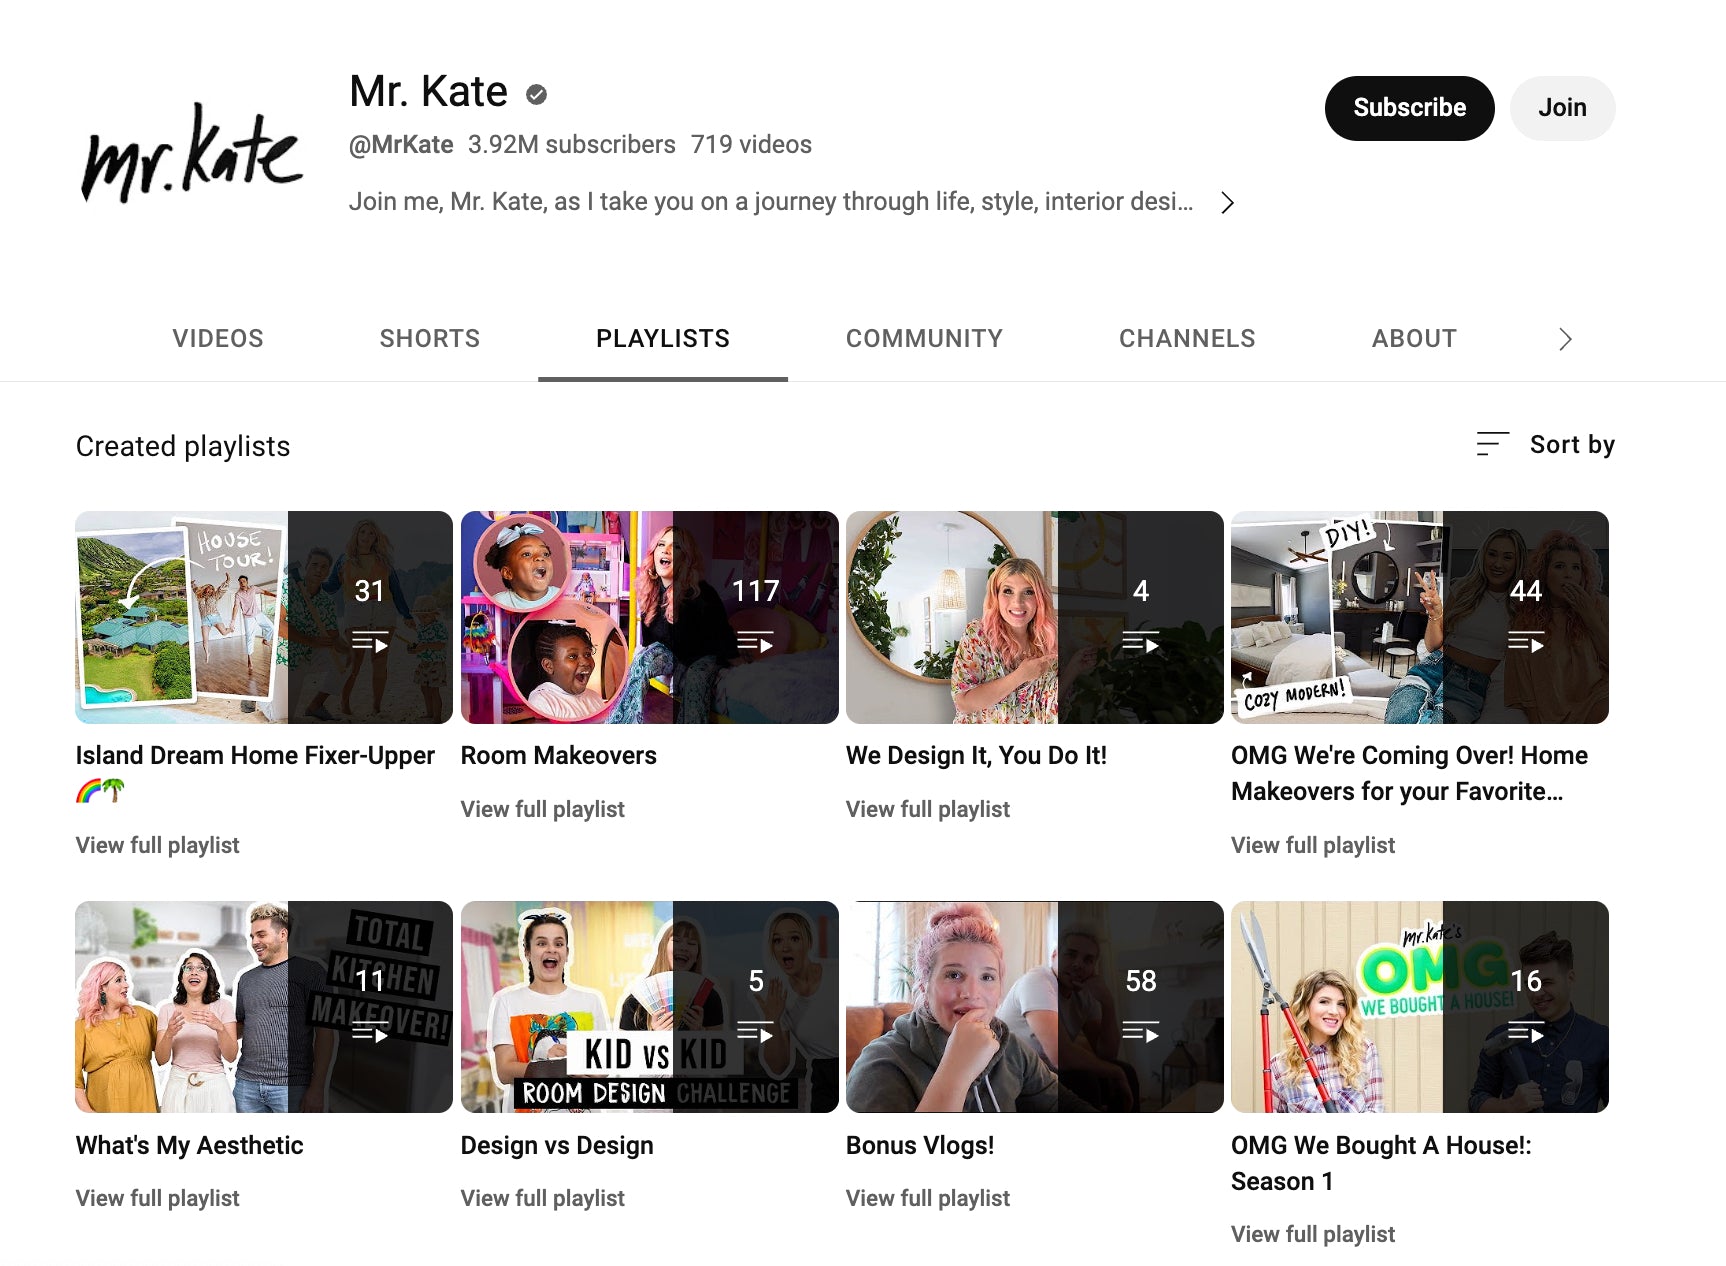 The playlist view of Mr. Kate's YouTube channel